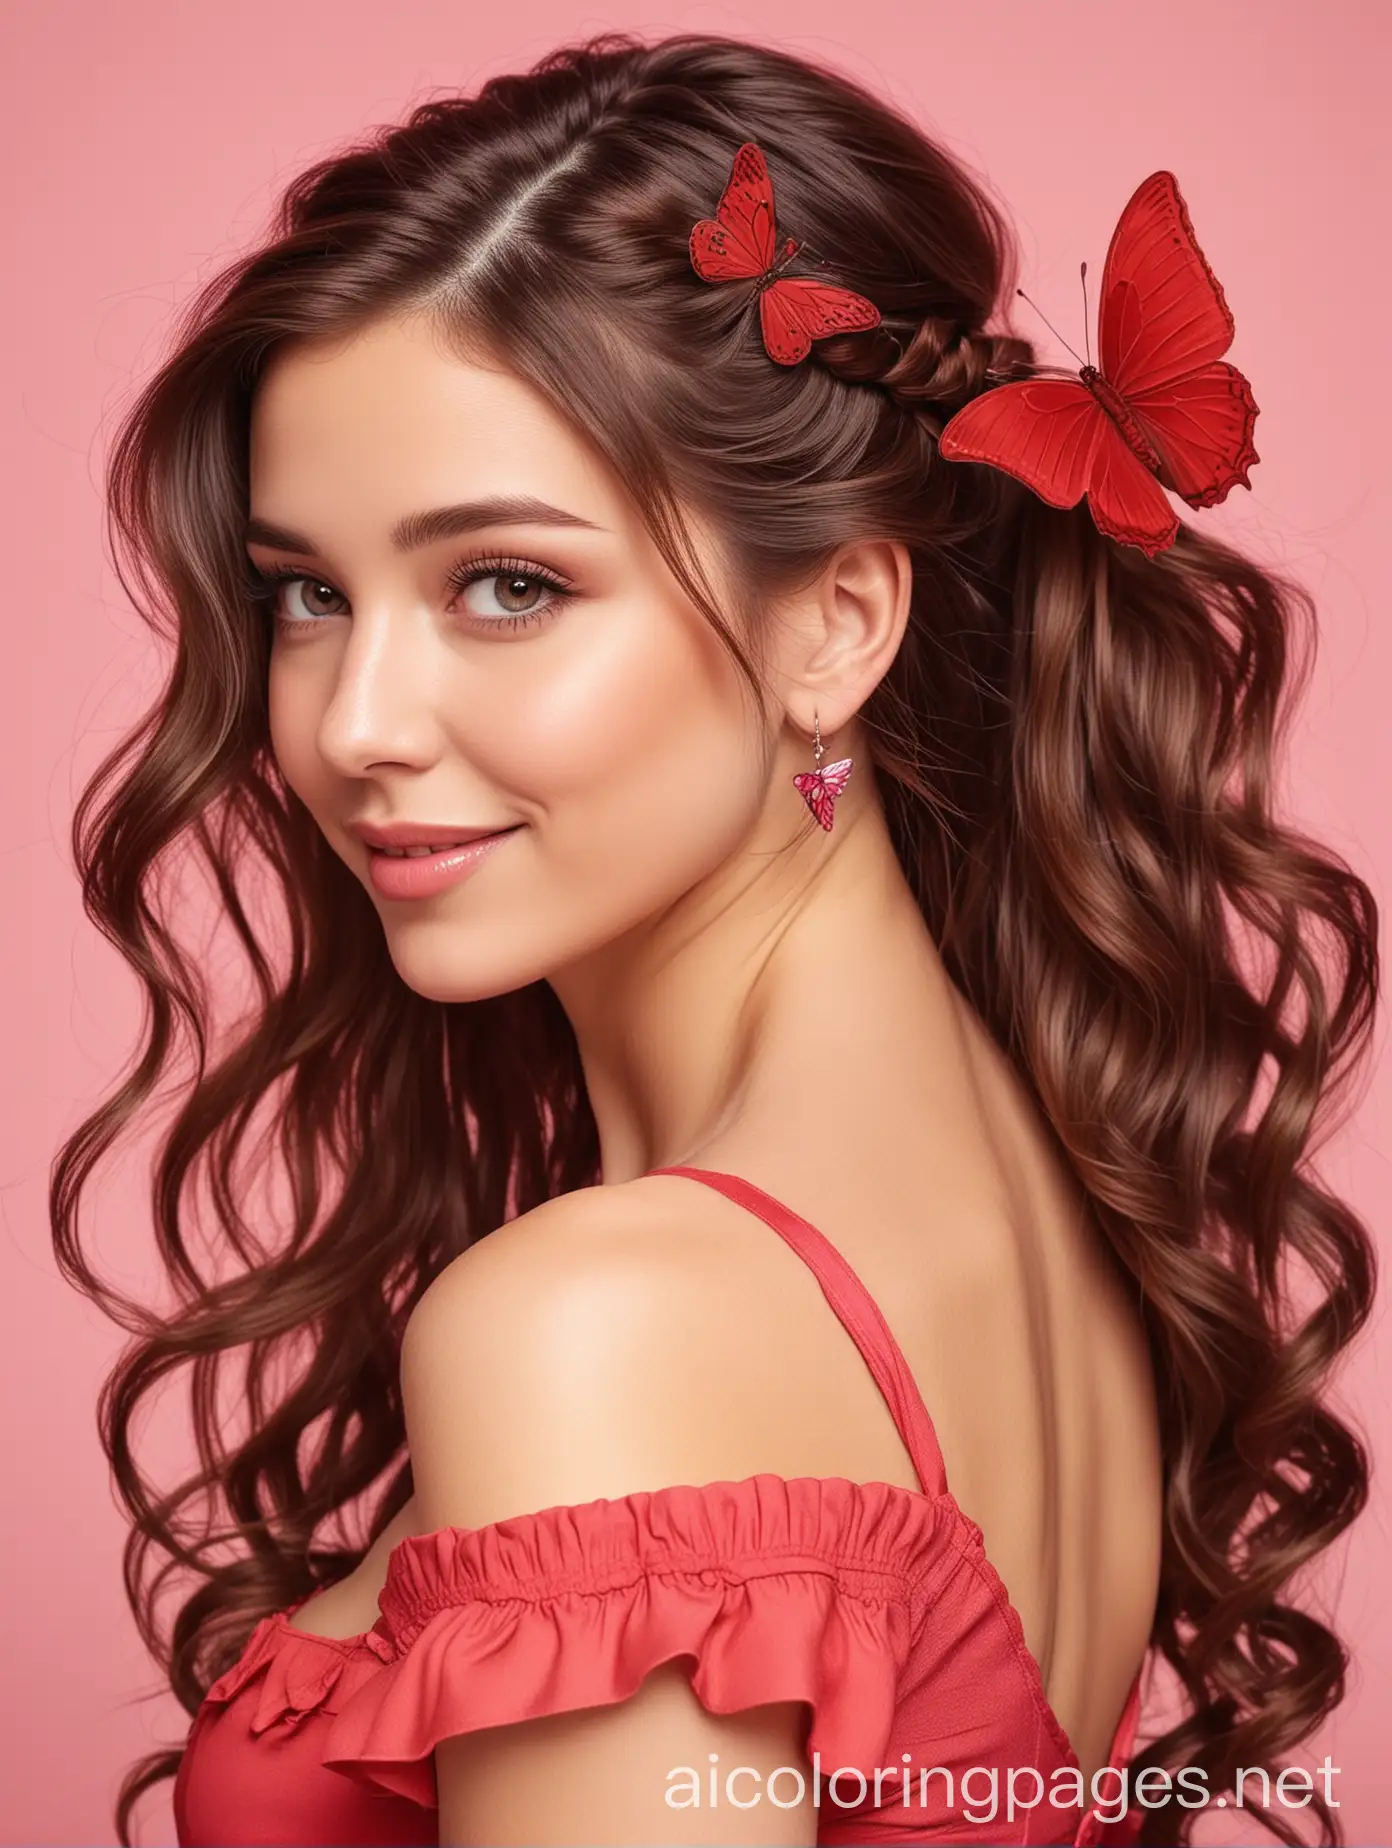 a young woman with long brown hair and red eyes. She is wearing a red dress with a sweetheart neckline and butterfly earrings. Her hair is styled in a fishtail braid with red butterfly hair clips. She has a soft smile on her face and is looking at the viewer over her shoulder. The background is a soft, out-of-focus pink., Coloring Page, black and white, line art, white background, Simplicity, Ample White Space.